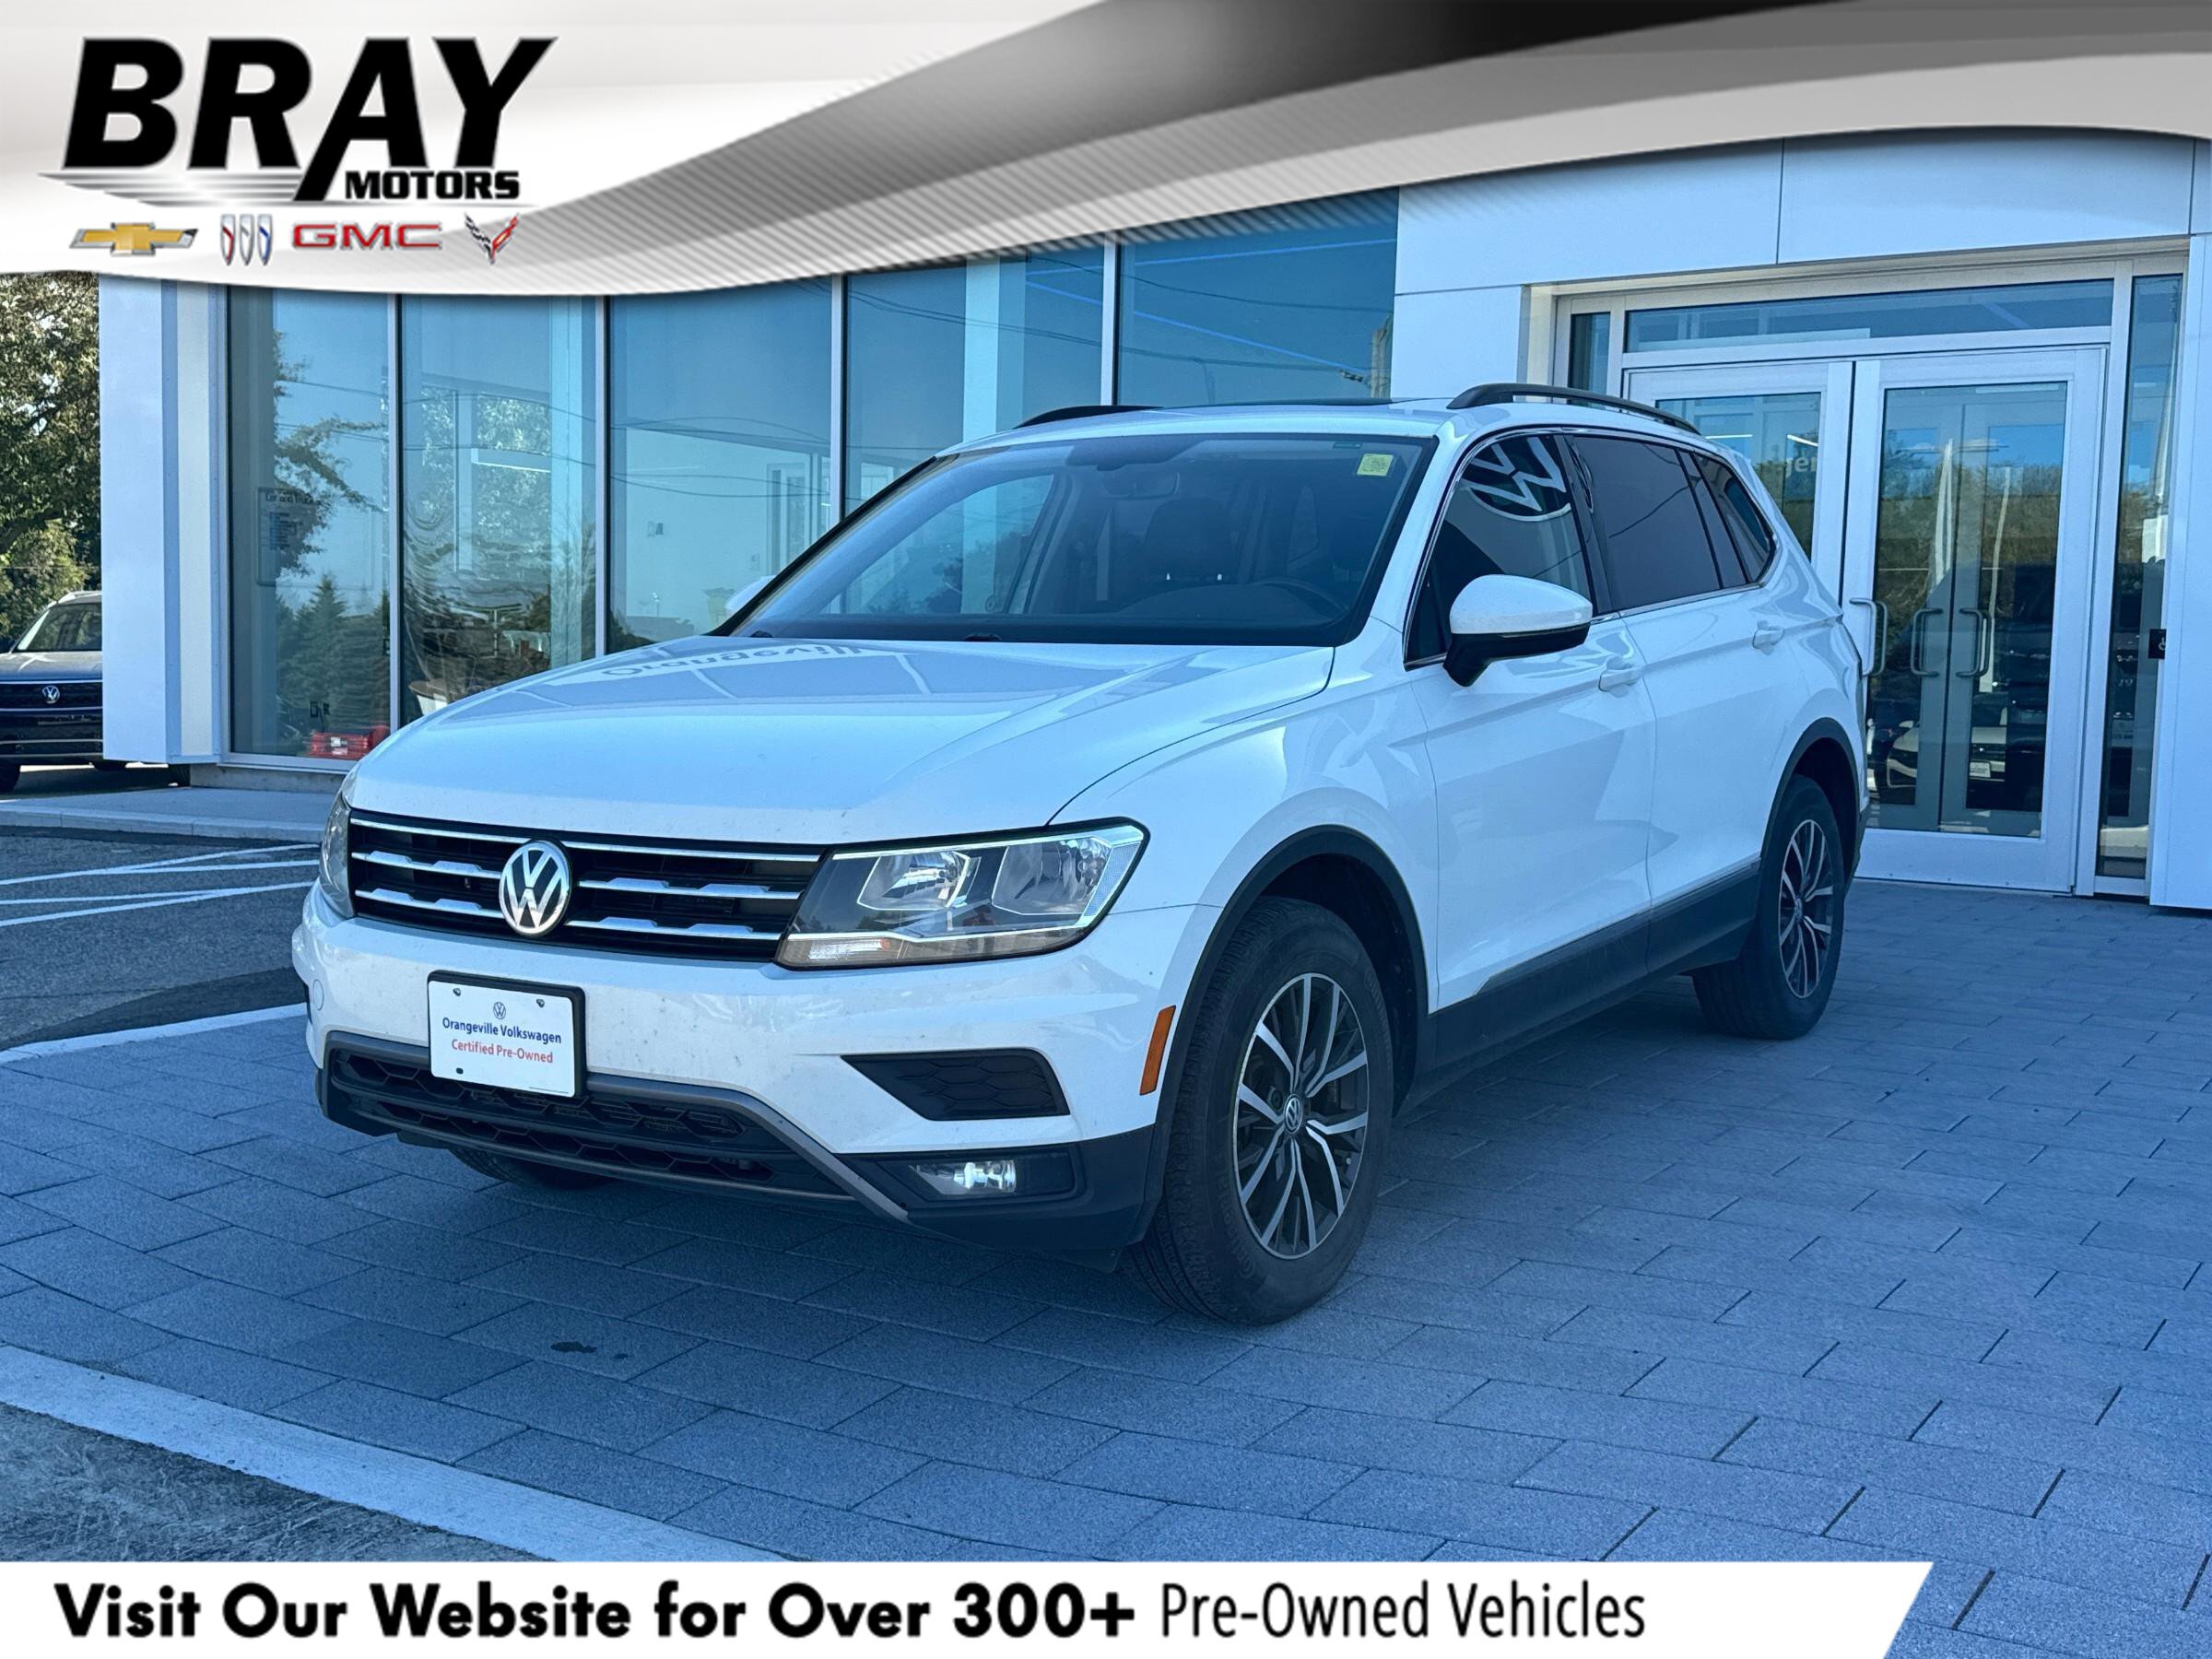 2019 Volkswagen Tiguan ComfortlineONE-OWNER, ACCICDENT-FREE, AWD, LEATHER